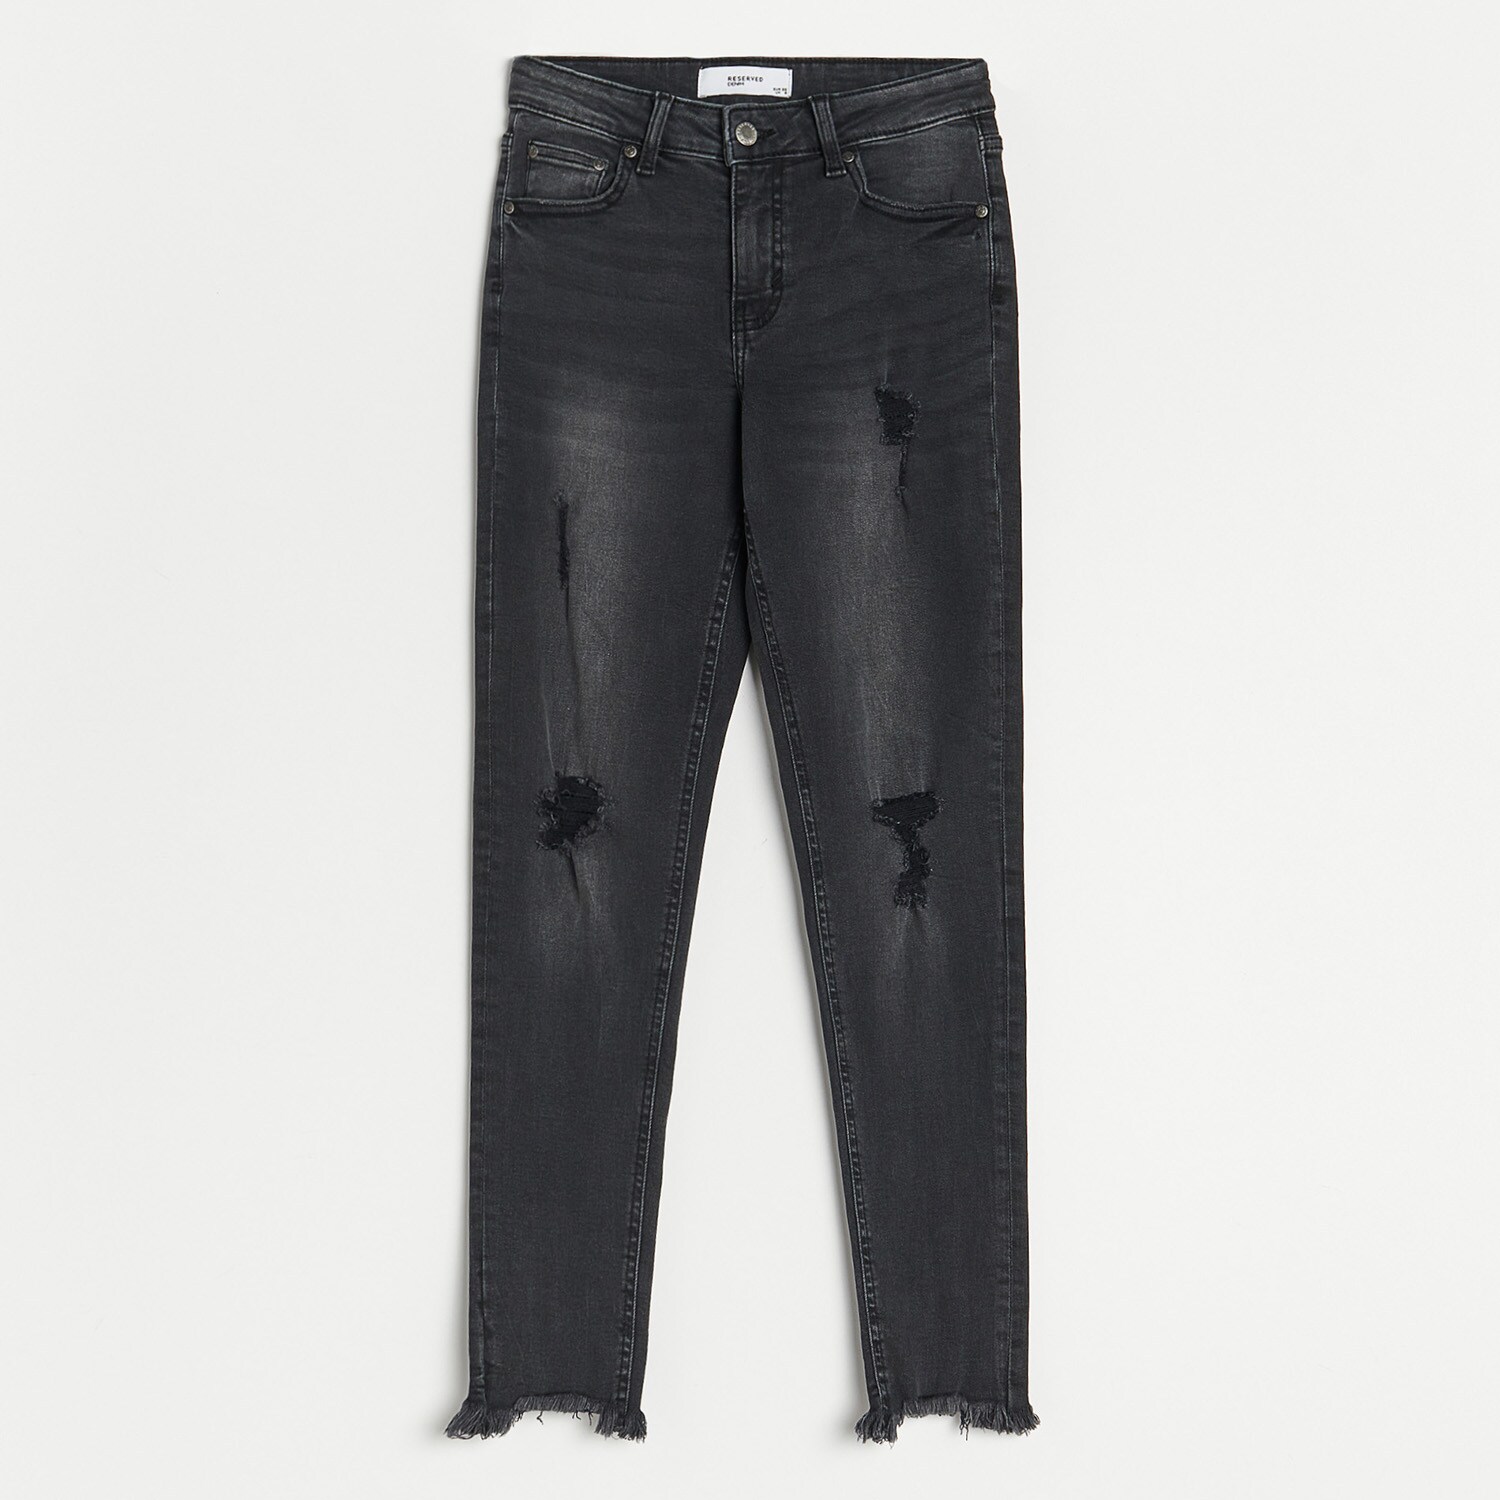 Ladies` jeans trousers